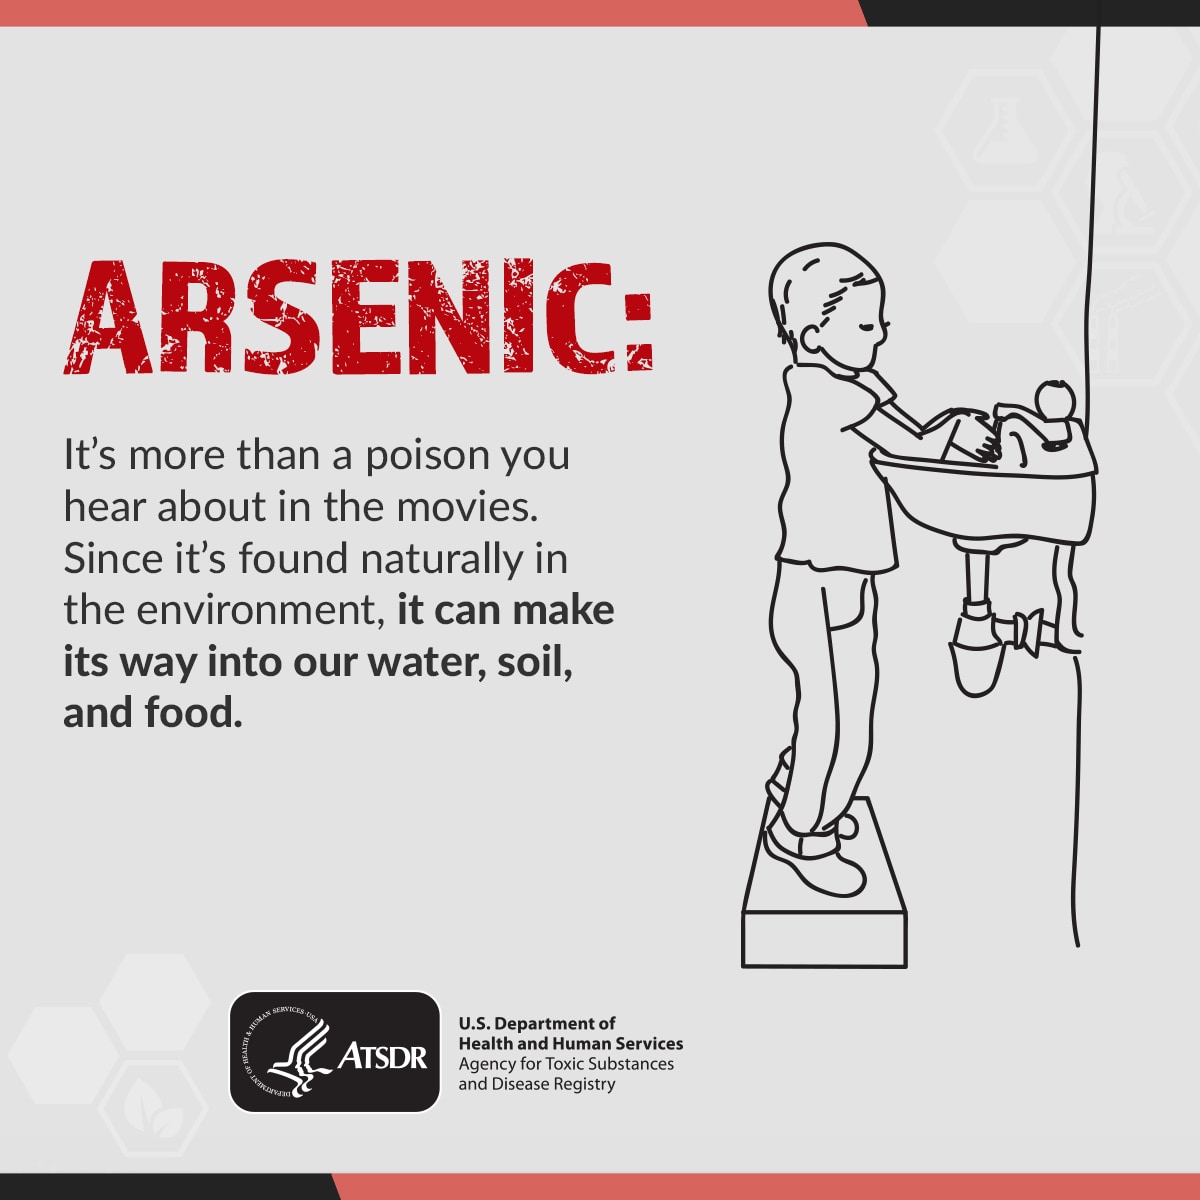 Arsenic is more than a poison you hear about in the movies. Since it's found naturally in the environment, it can make its way into our water, soil, and food.